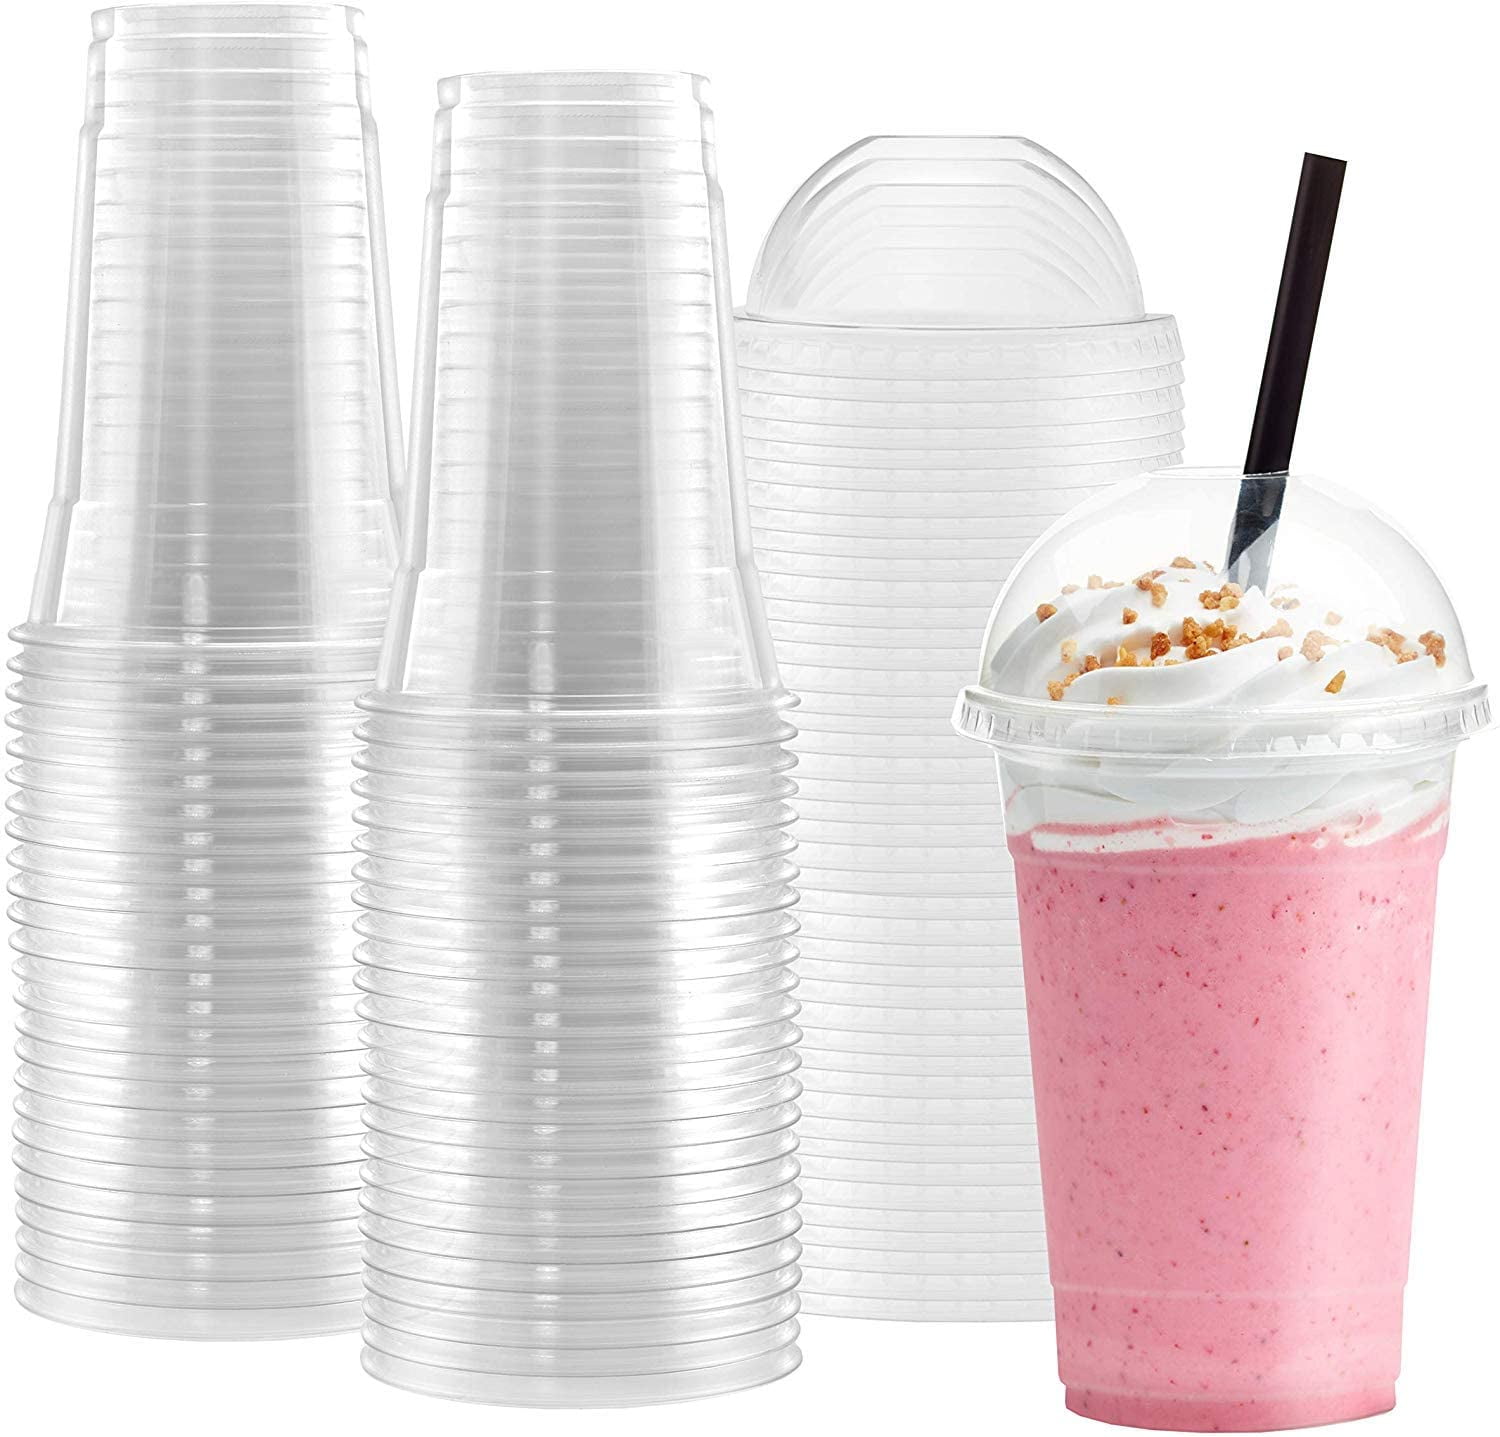 Disposable Clear plastic Smoothie/ Milkshake/Juice Cups and Domed Lids 10 oz 